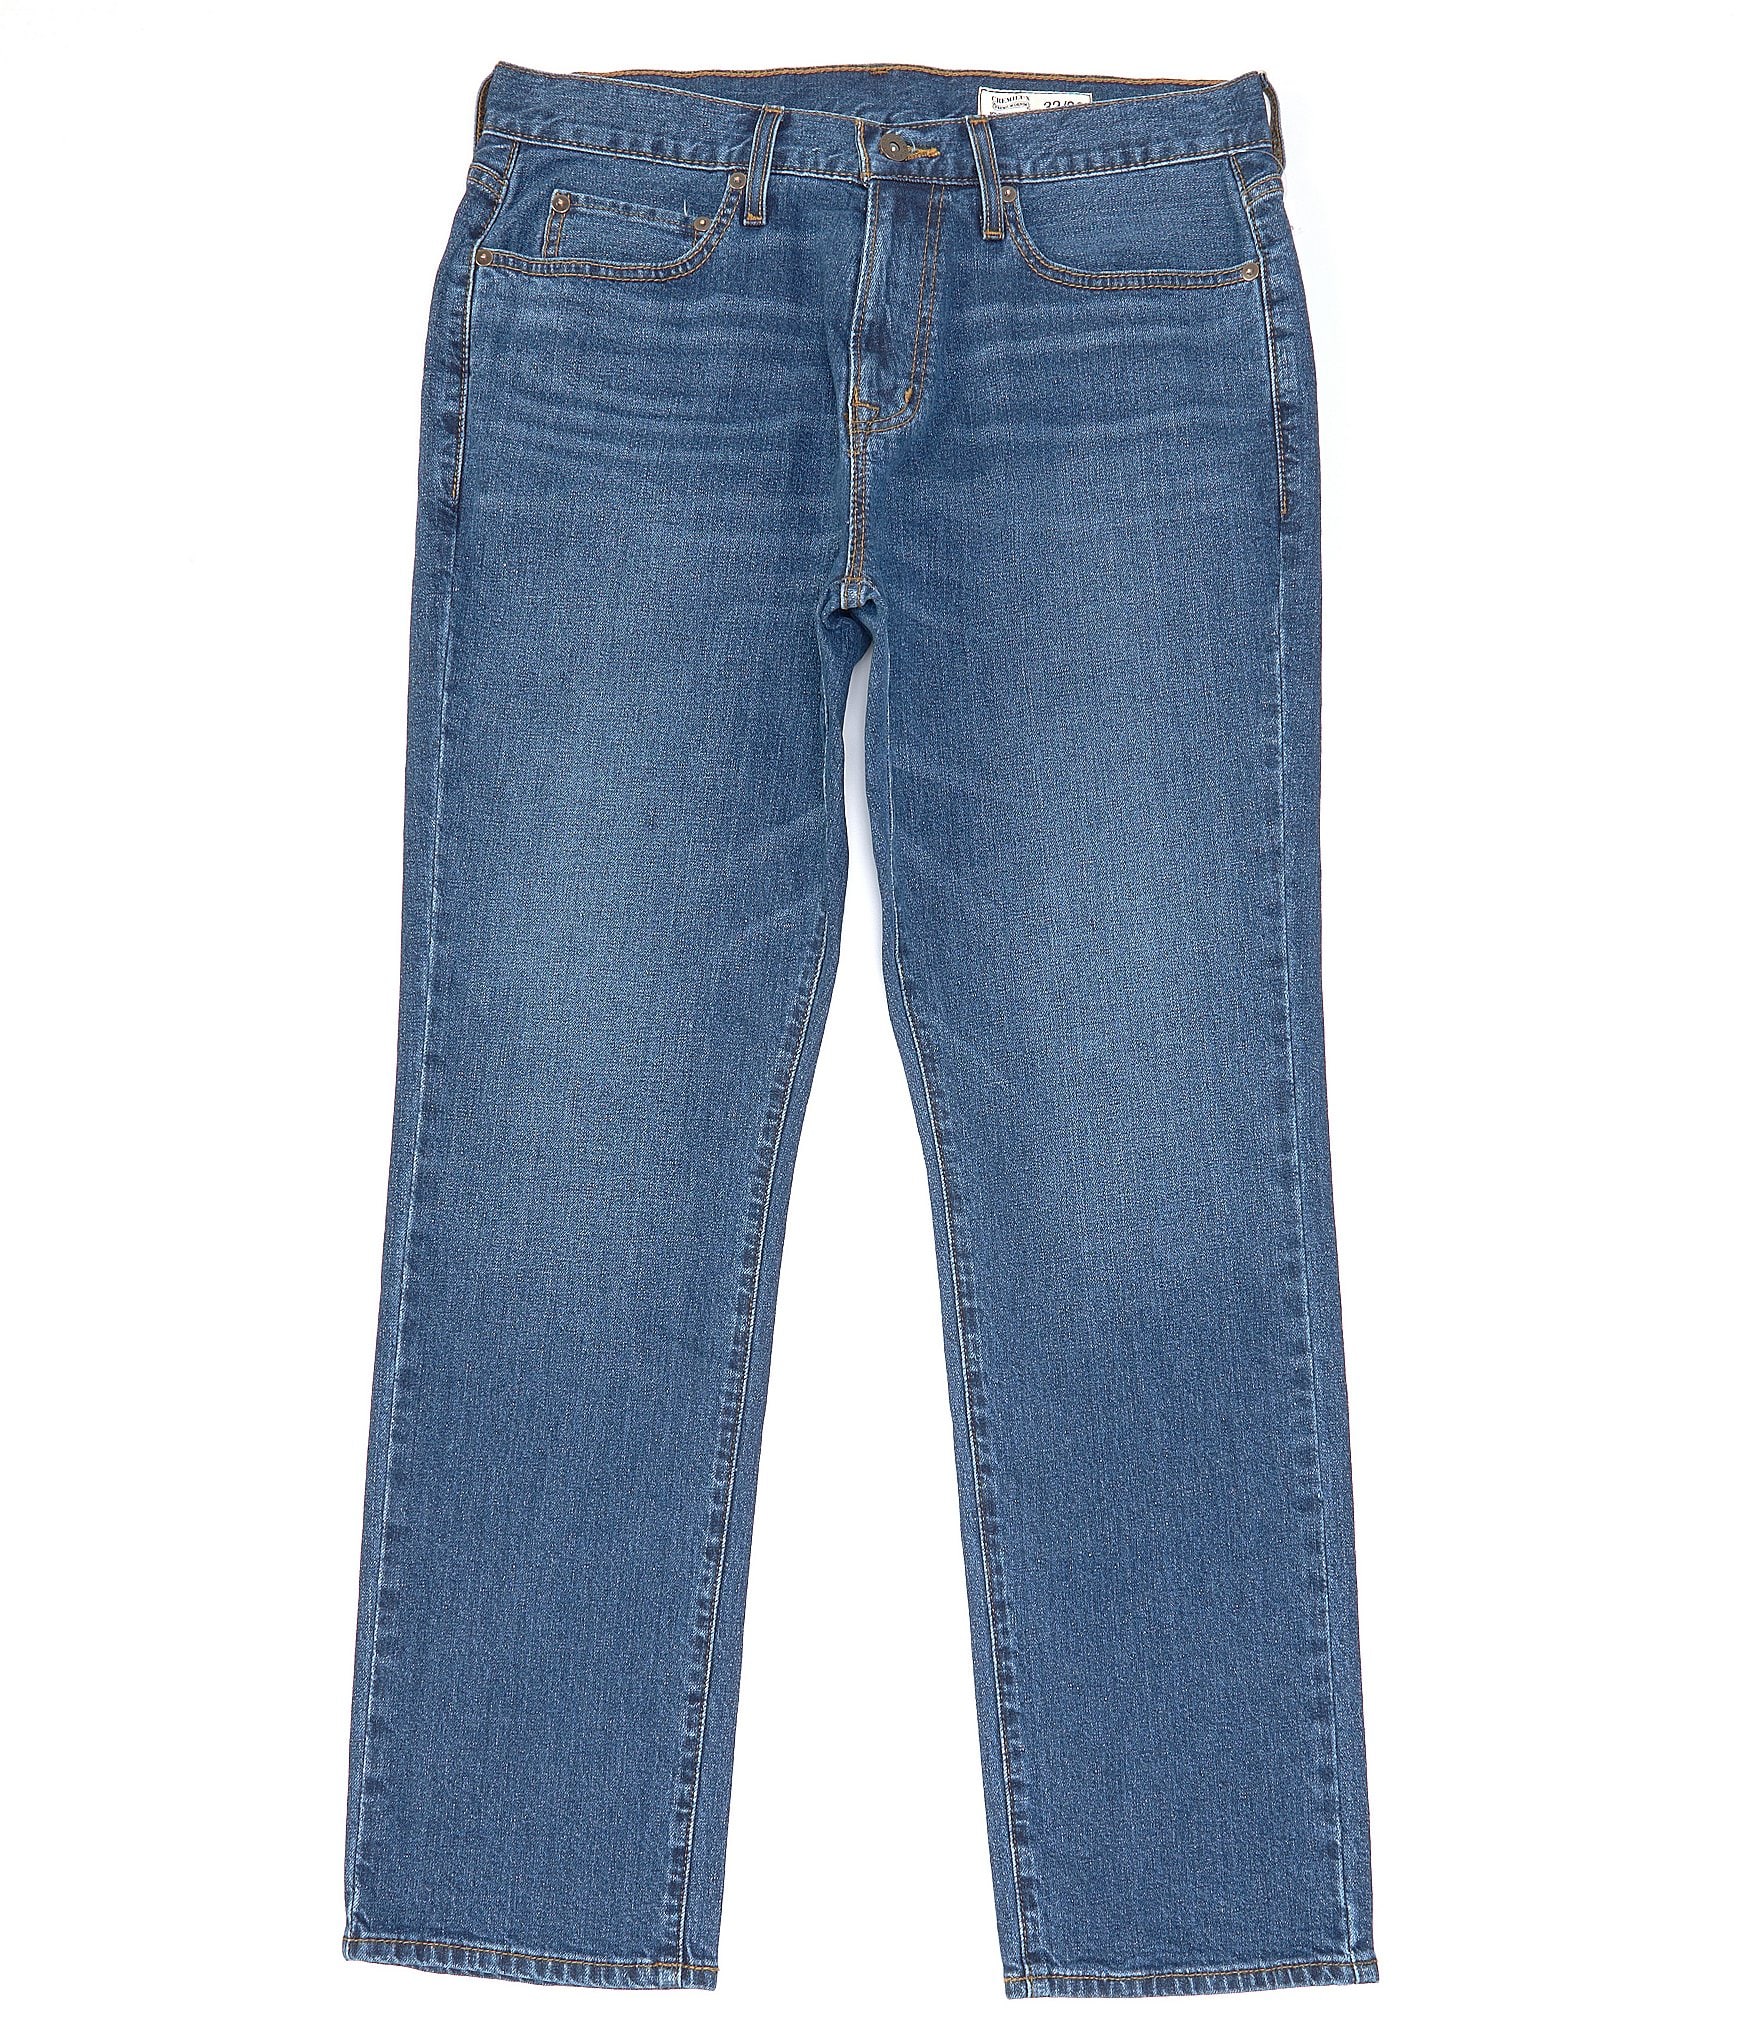 Cremieux Jeans Relaxed Straight-Fit 5-Pocket Jeans | Dillard's